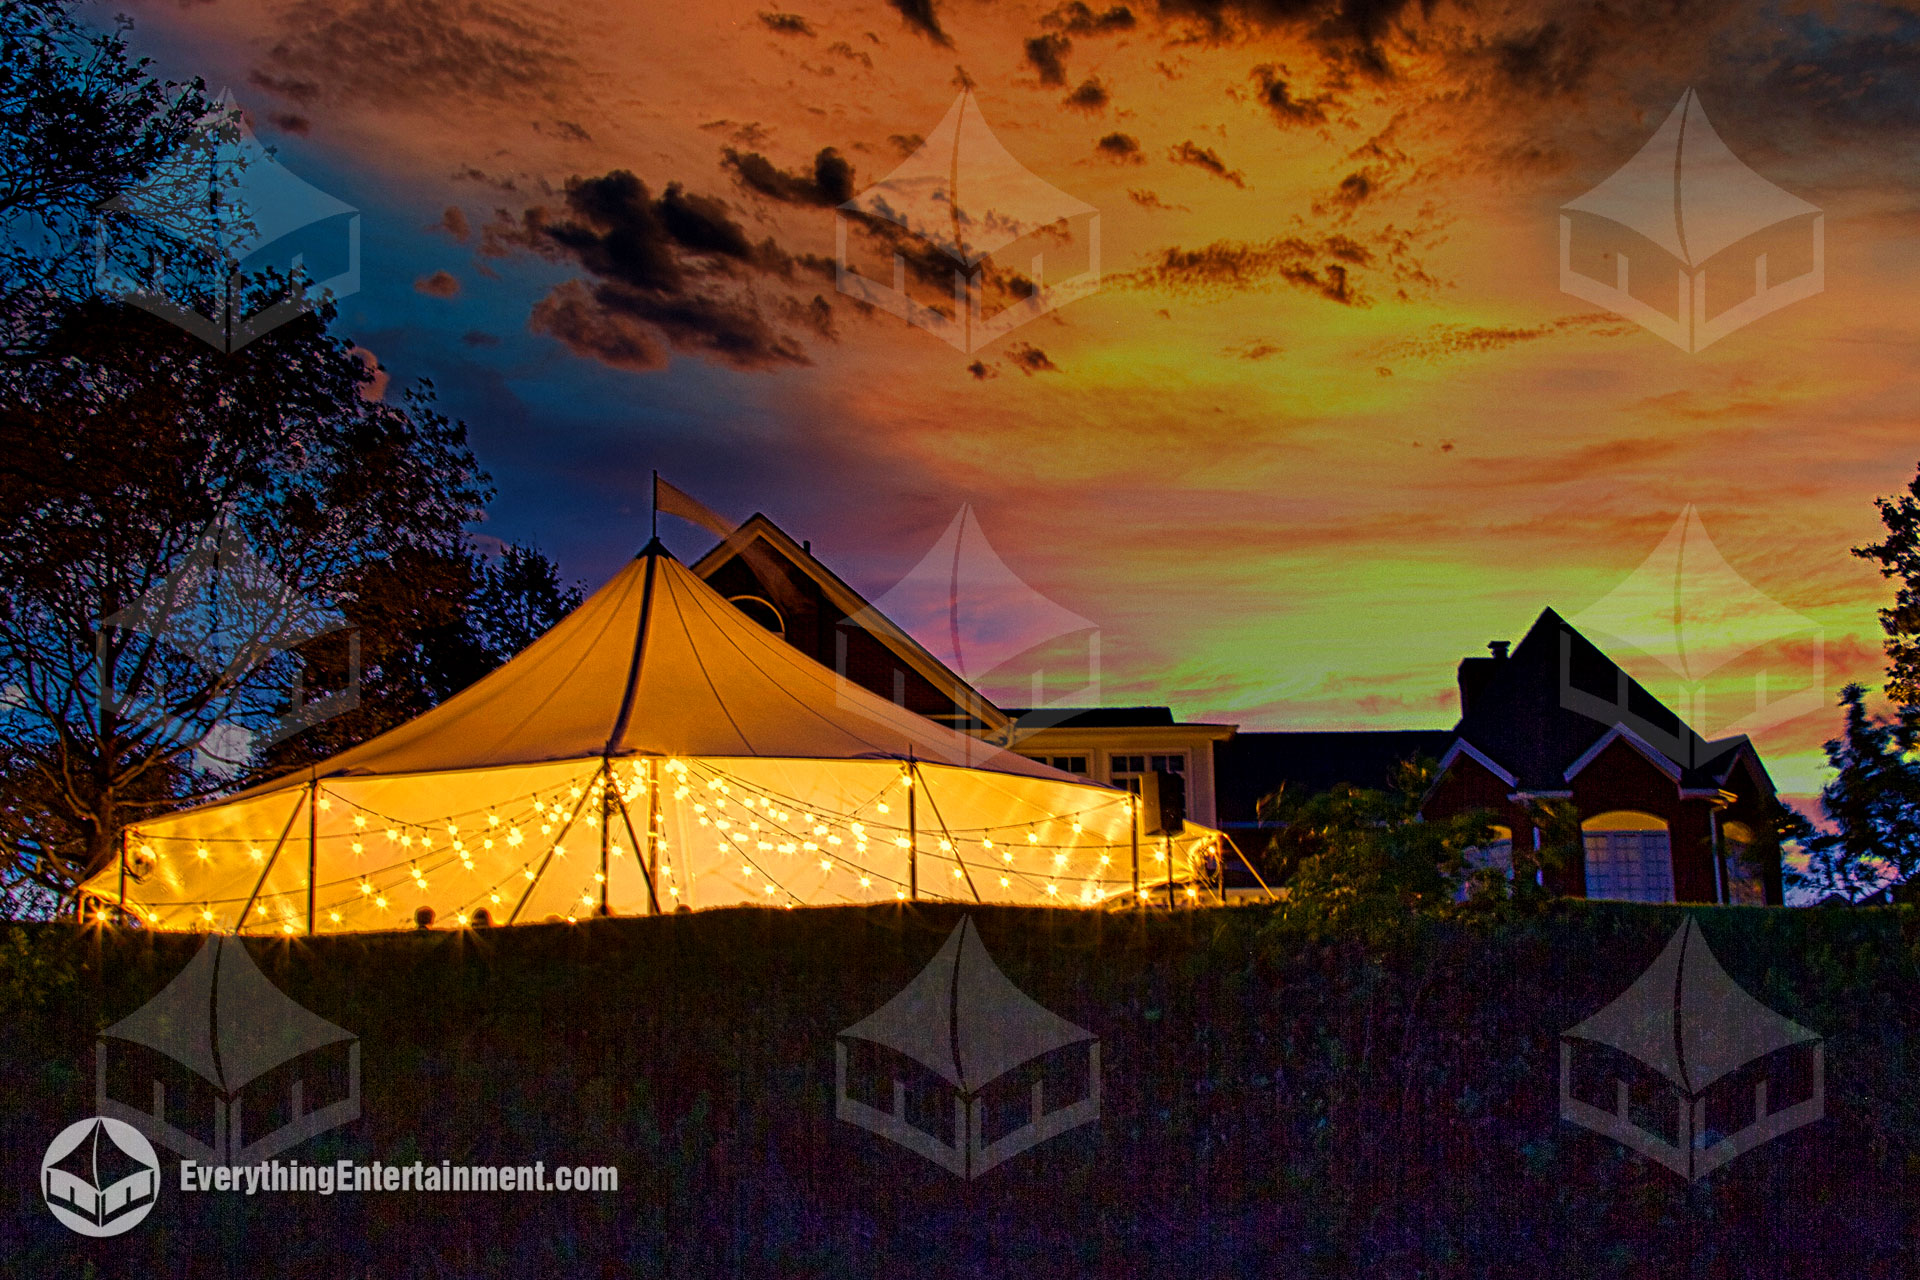 sail cloth tent with bistro string lights setup in the evening sunset